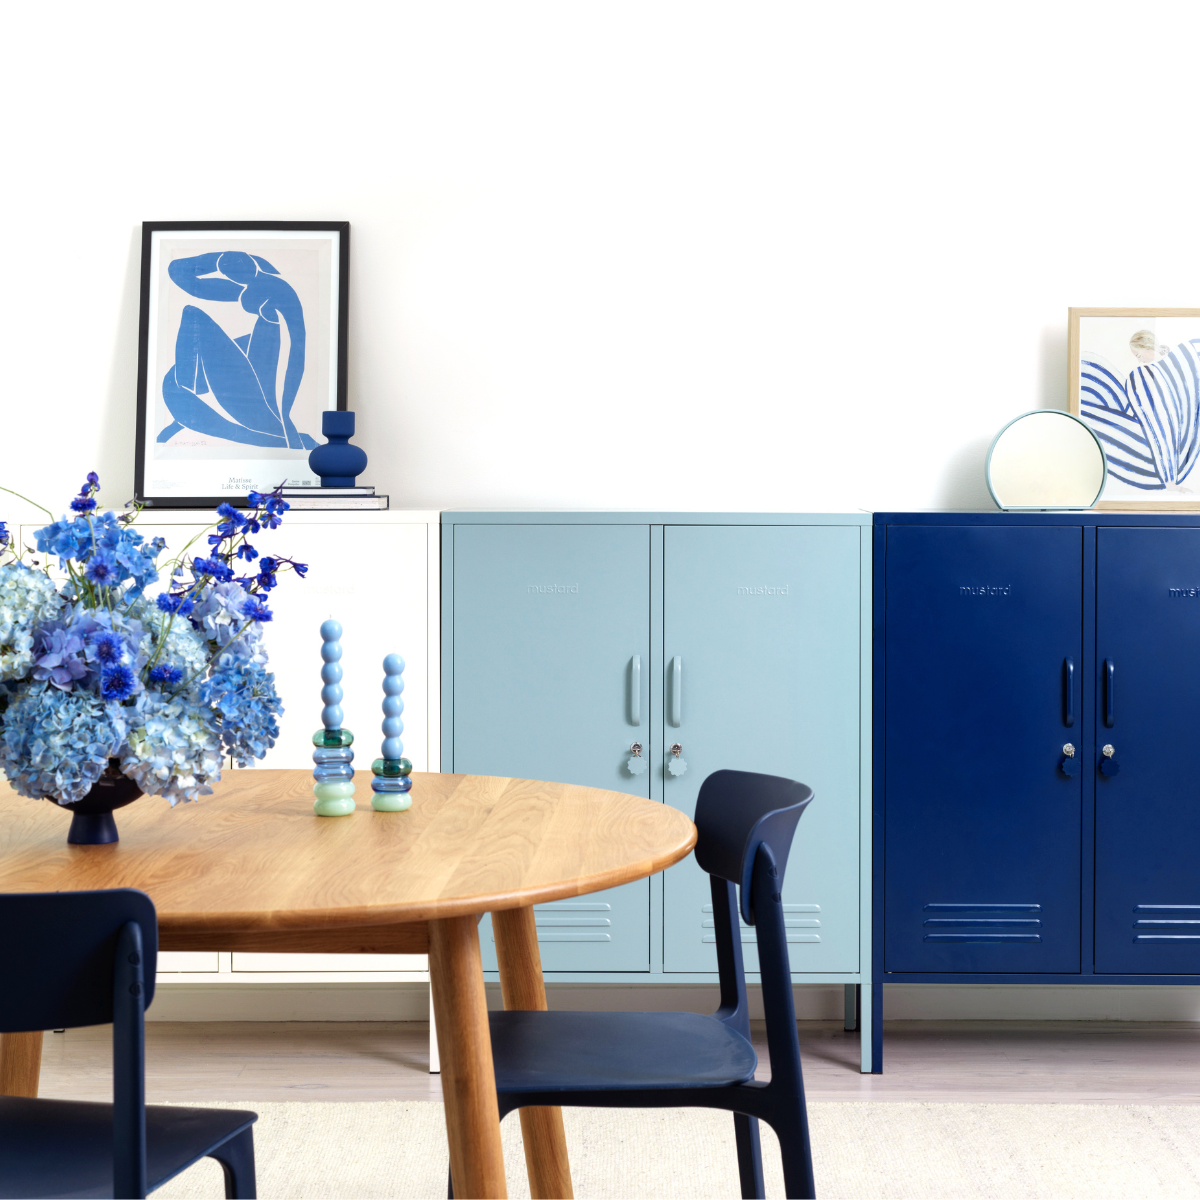 A trio of Midi lockers in an ombre pattern from white to Ocean to Navy are styled behind a round wooden dining table. There is a vase of luscious, full blue flowers and a selection of blue-toned artworks.